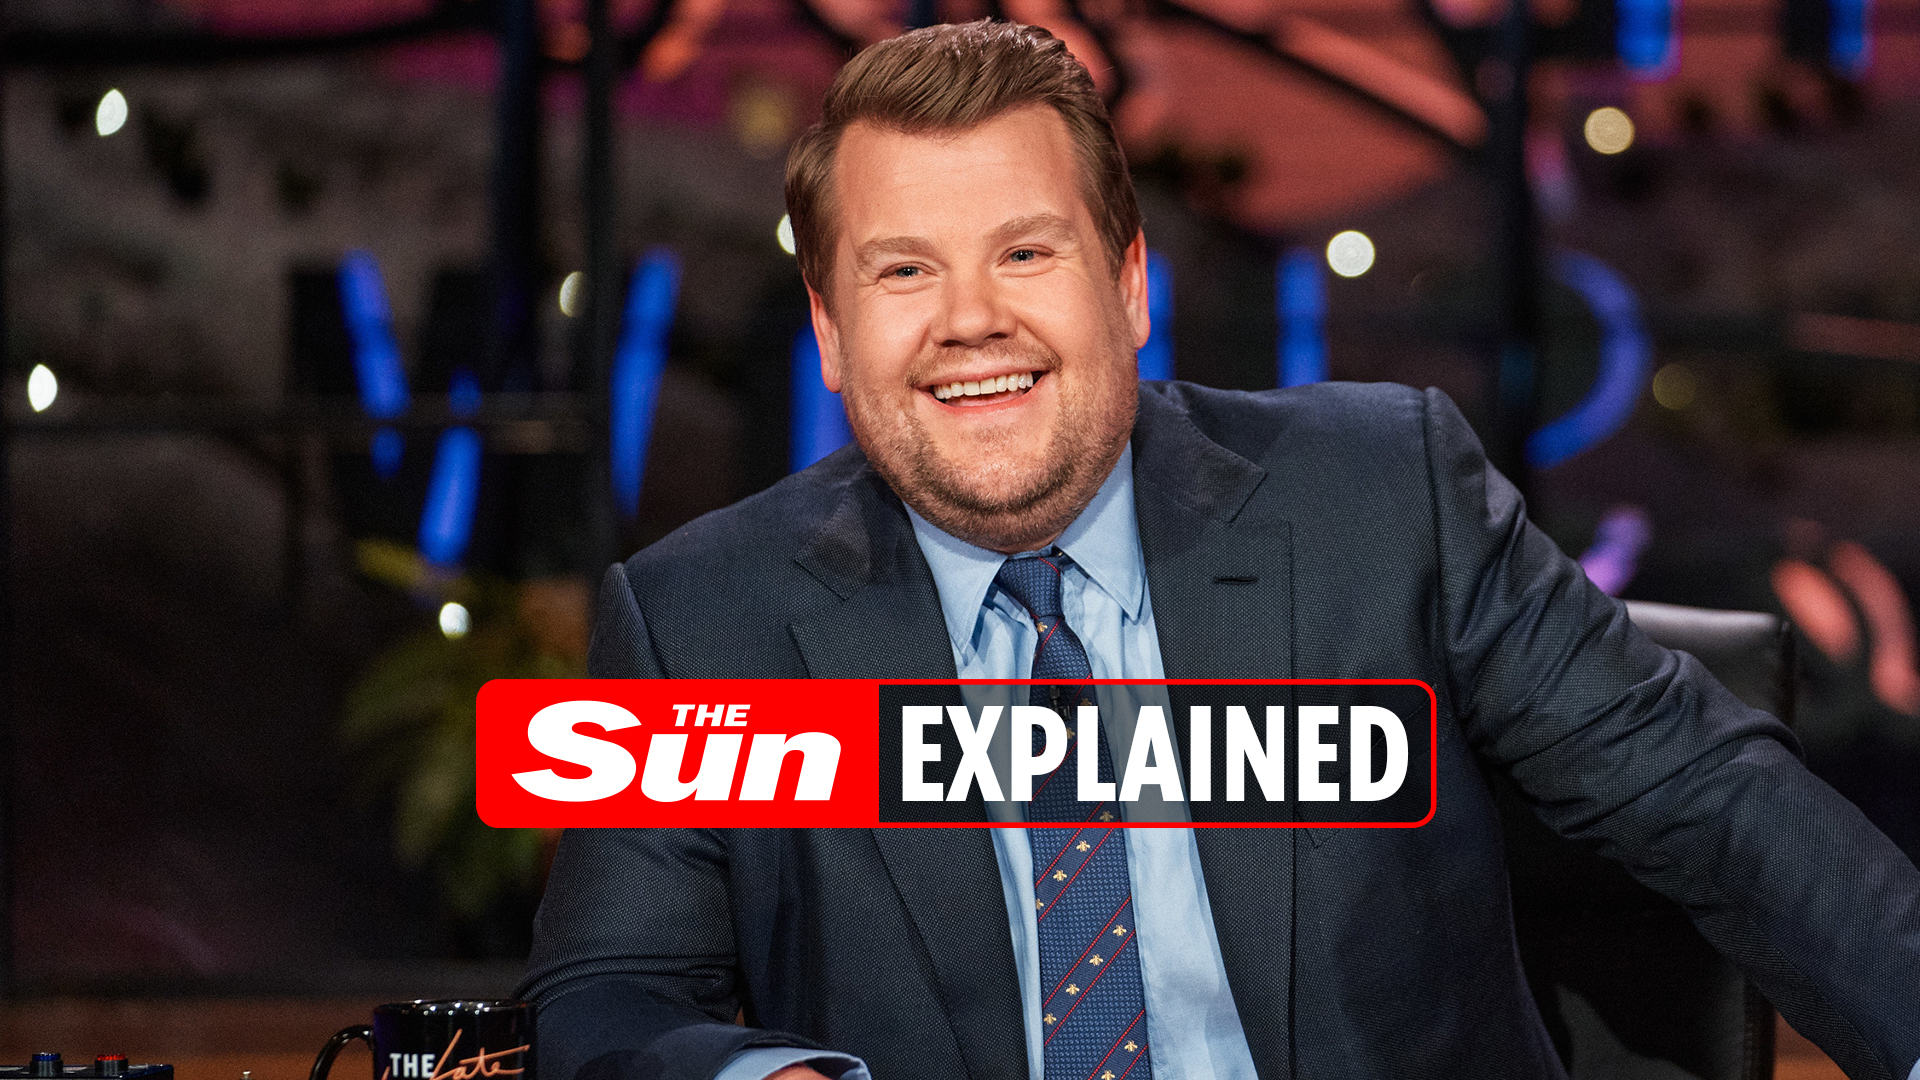 Why is James Corden quitting The Late Late Show?